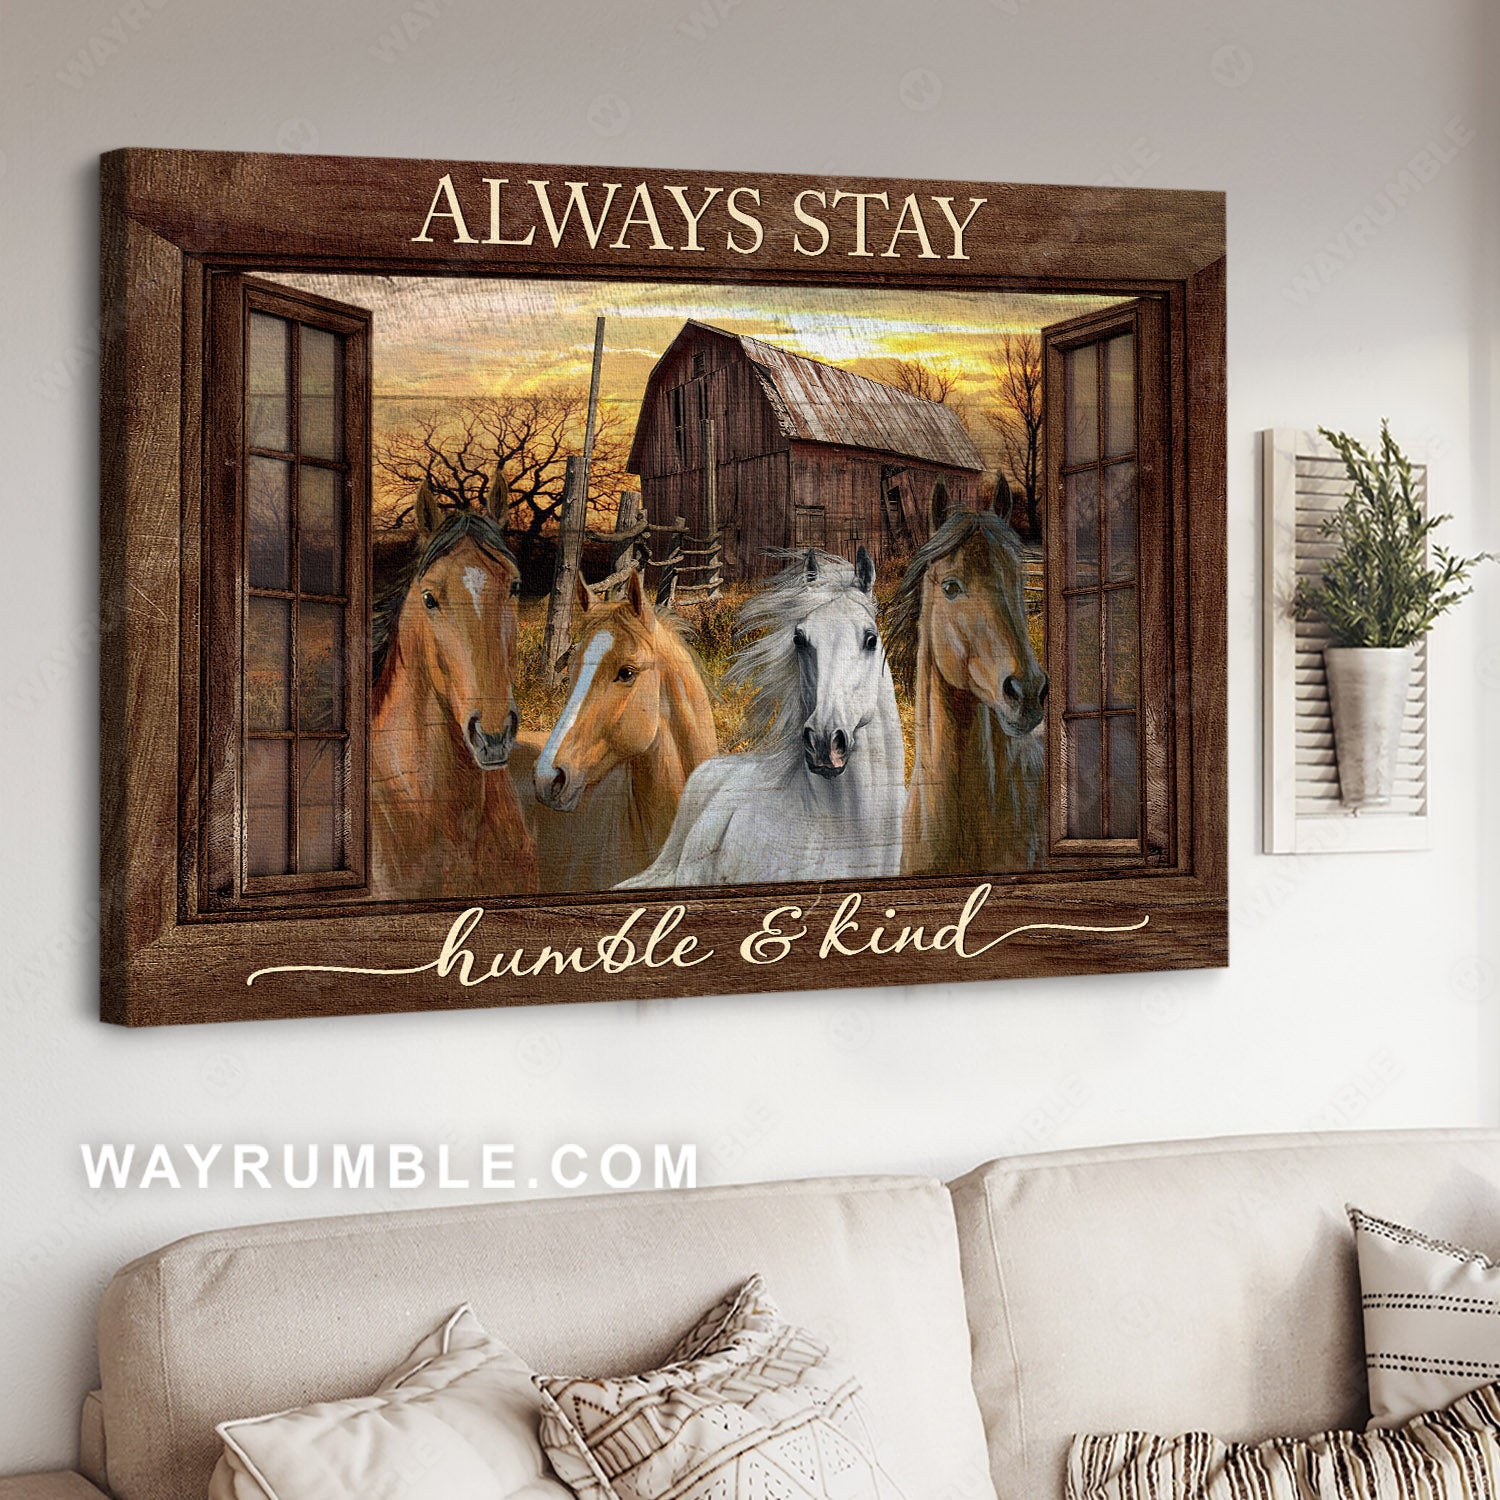 Horse painting, Rustic farmhouse, Wooden windows, Always stay humble & kind - Jesus Landscape Canvas Prints, Christian Wall Art